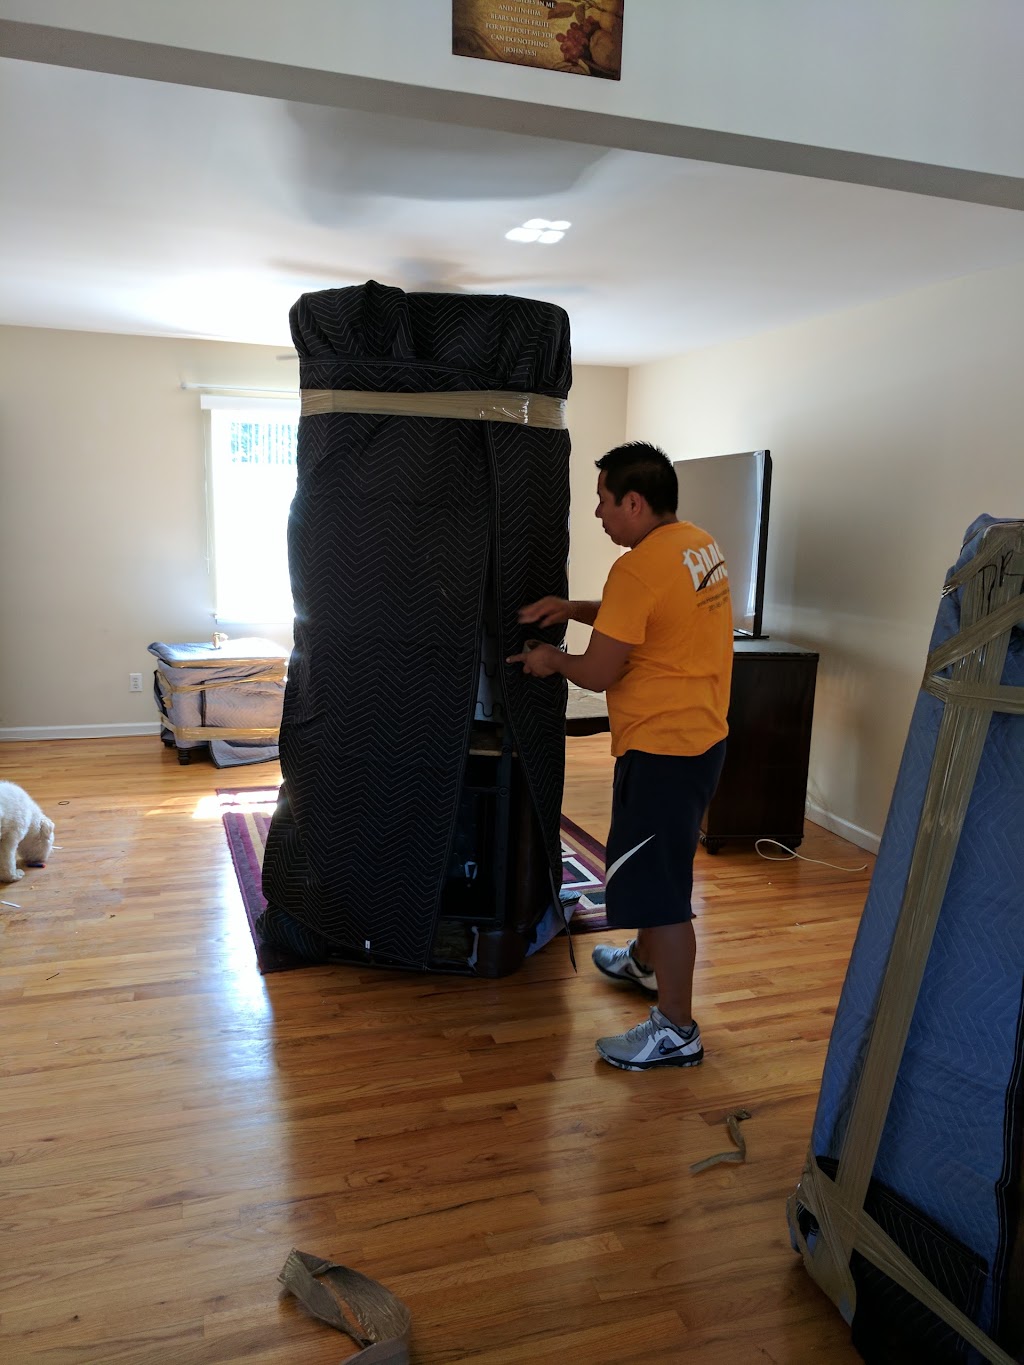 Home Moving Solutions | 299 Forest Ave h, Paramus, NJ 07652 | Phone: (201) 345-4663